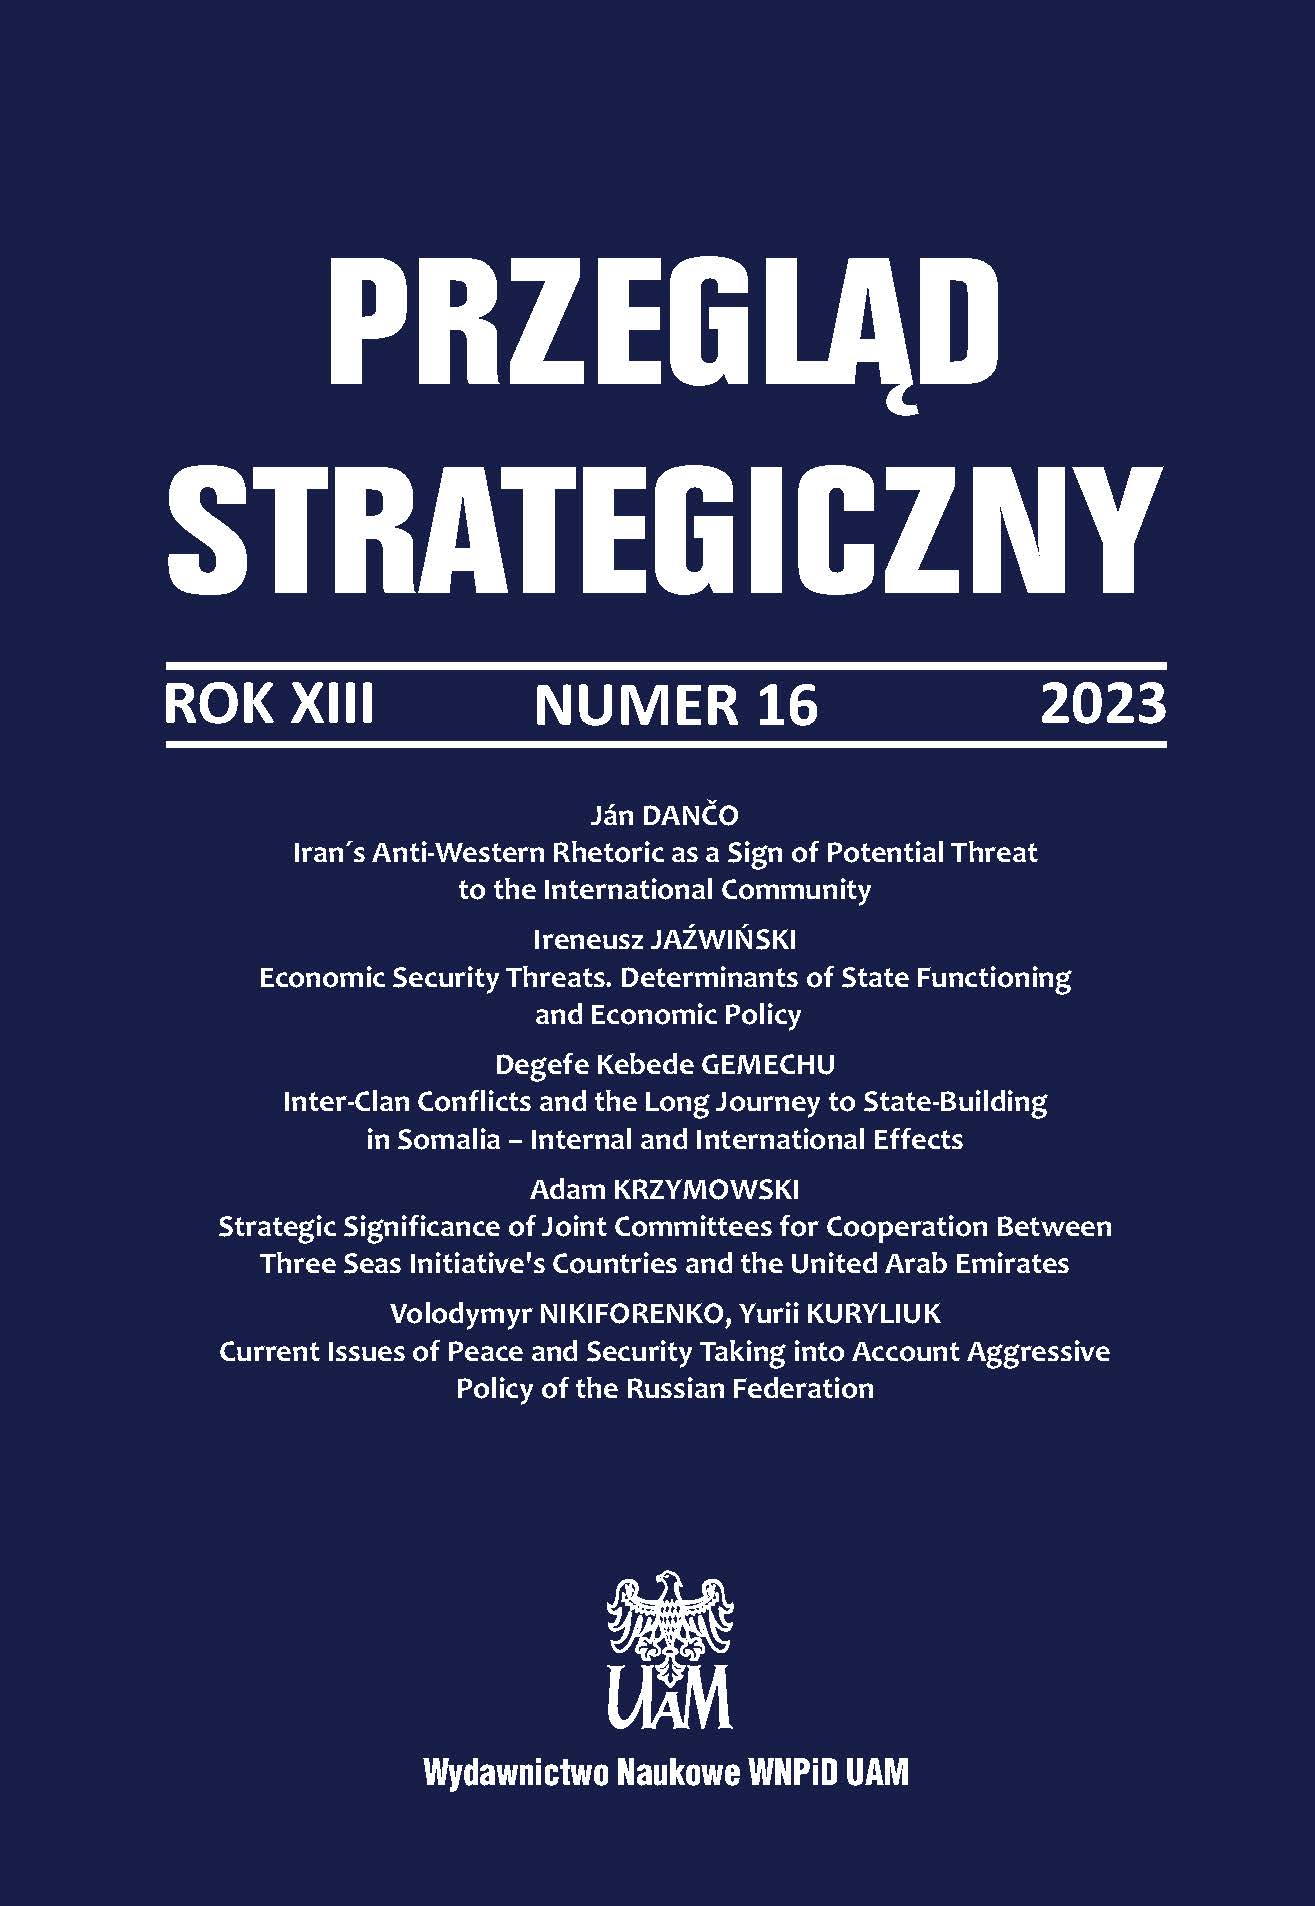 The Black Sea Regional Security and Geostrategy Balance: A “New Cold War” Scenario Cover Image